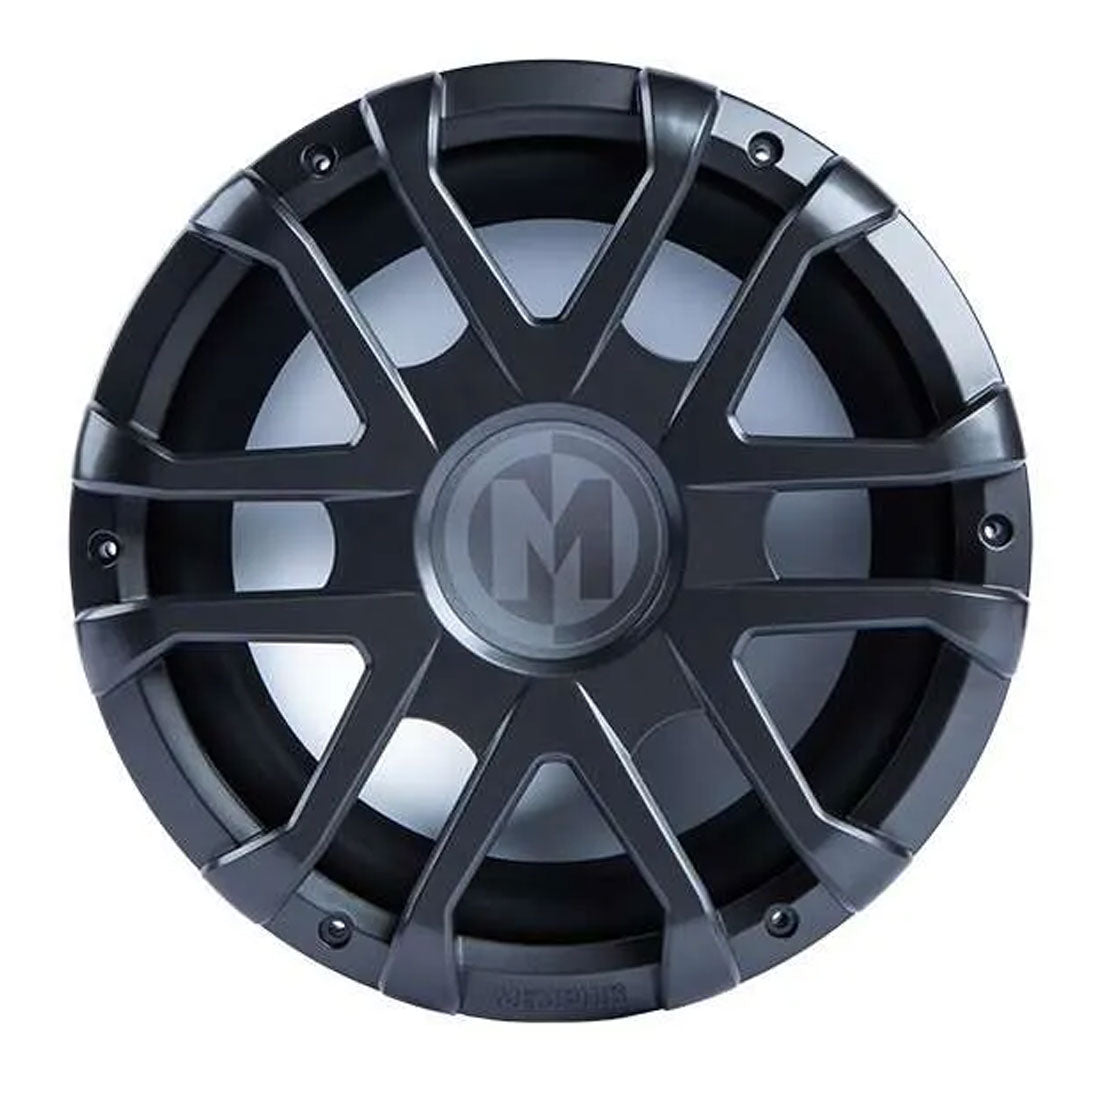 Memphis Audio MM1224 12" Marine Subwoofer – Selectable 1 or 2-ohm